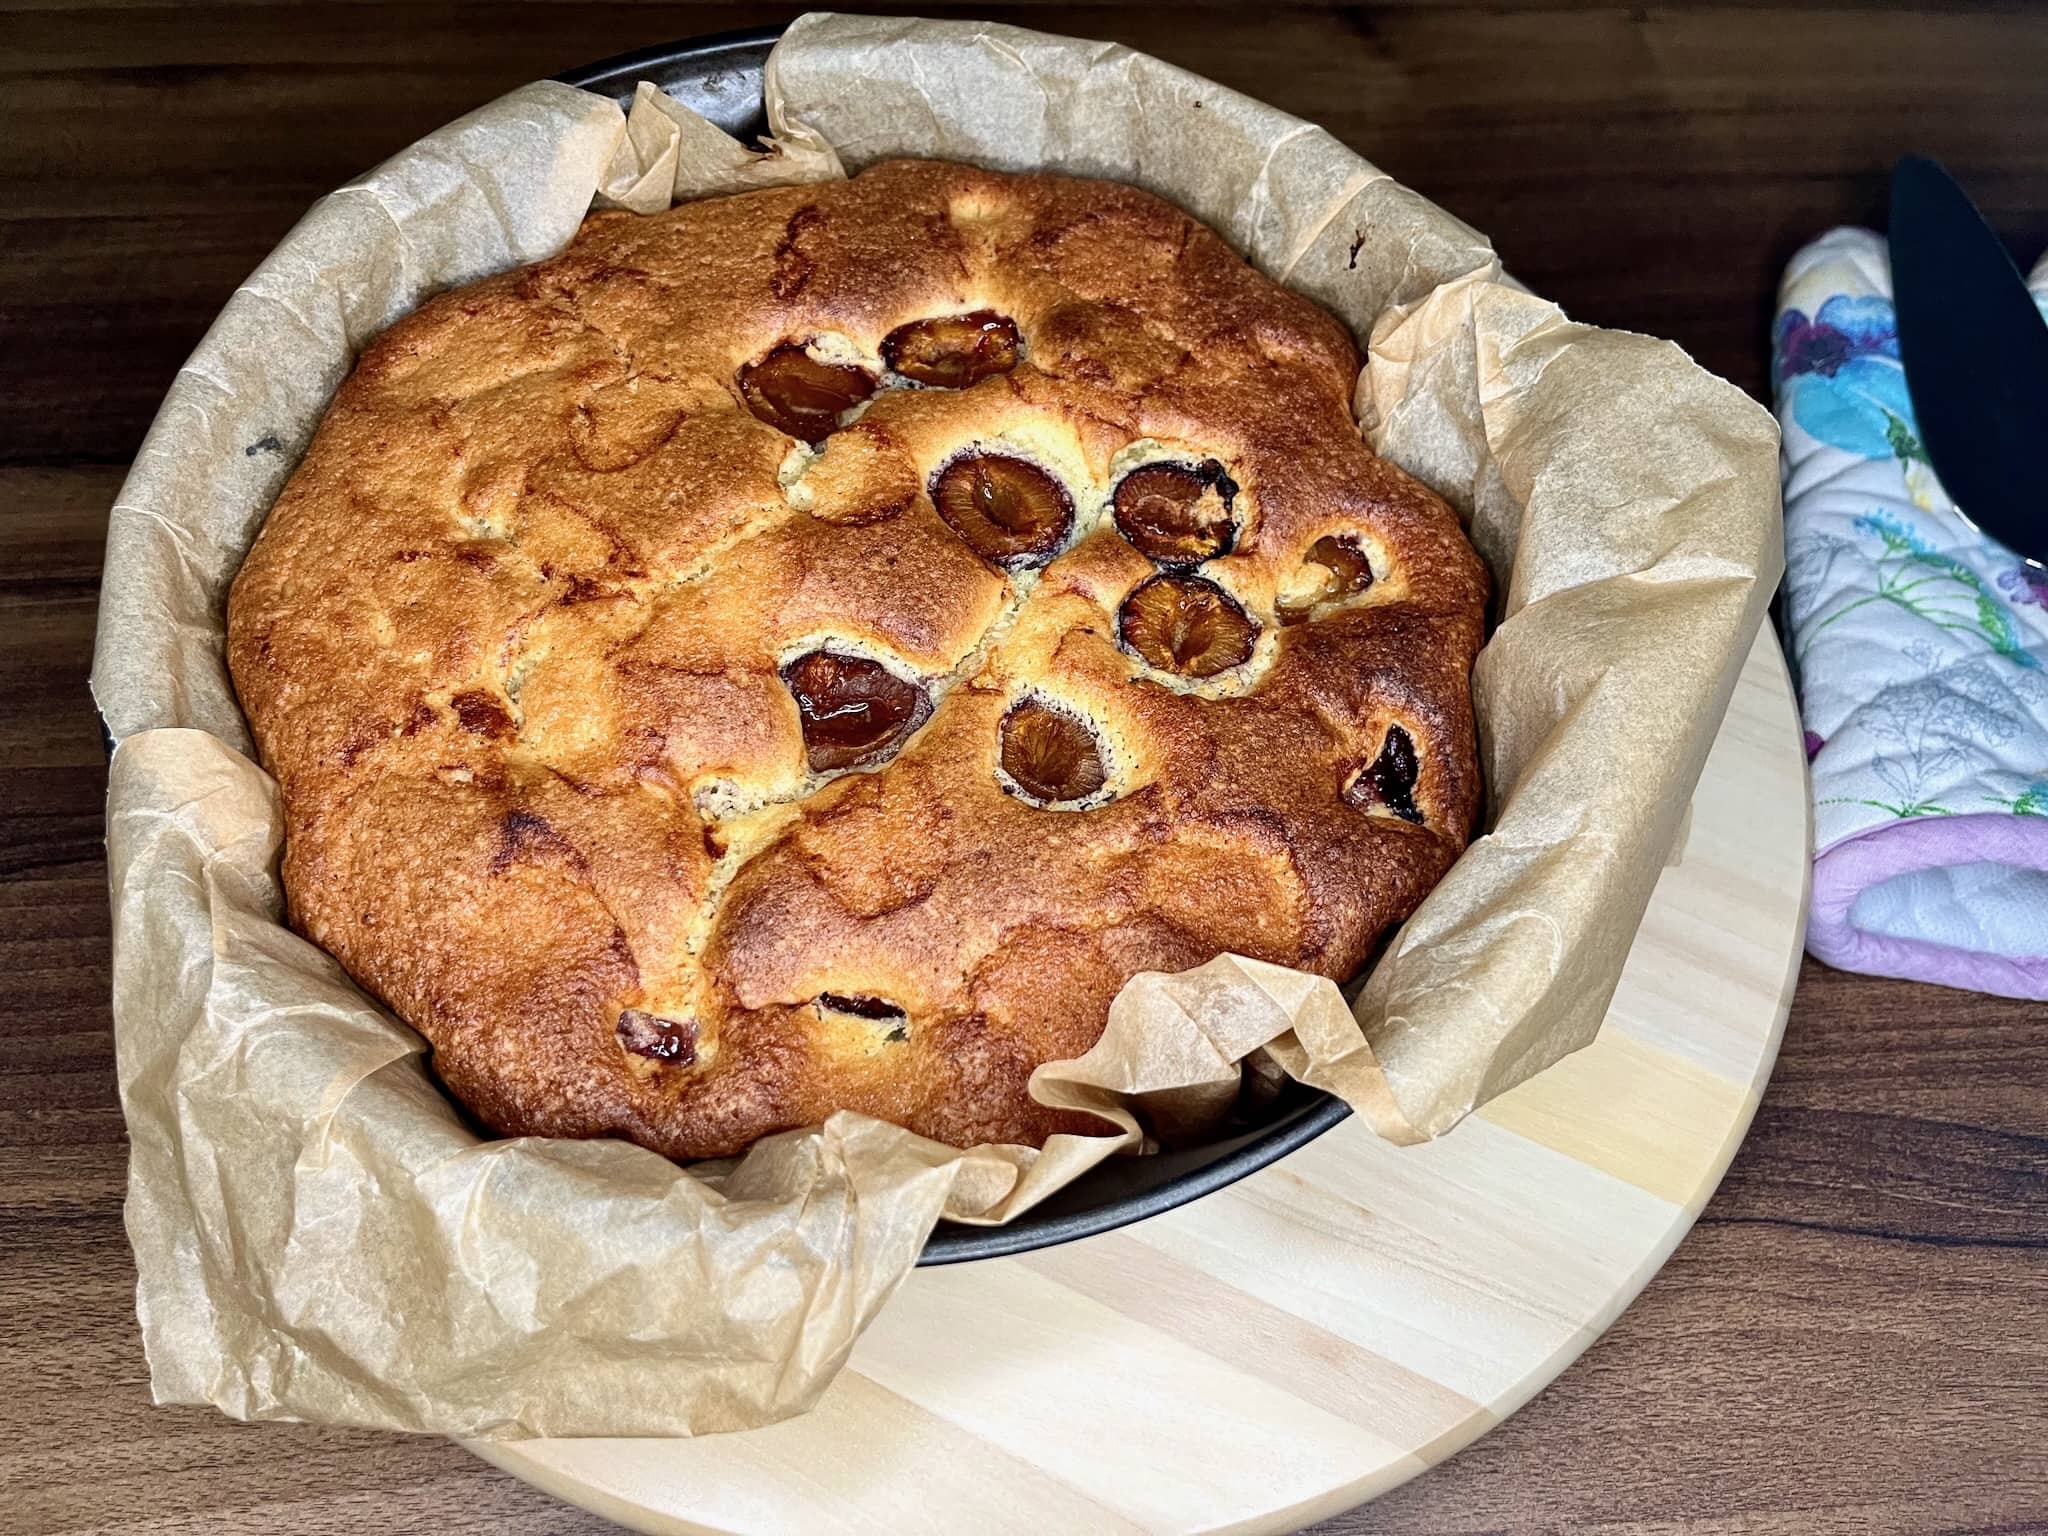 A freshly baked plum sponge cake, straight out of the oven